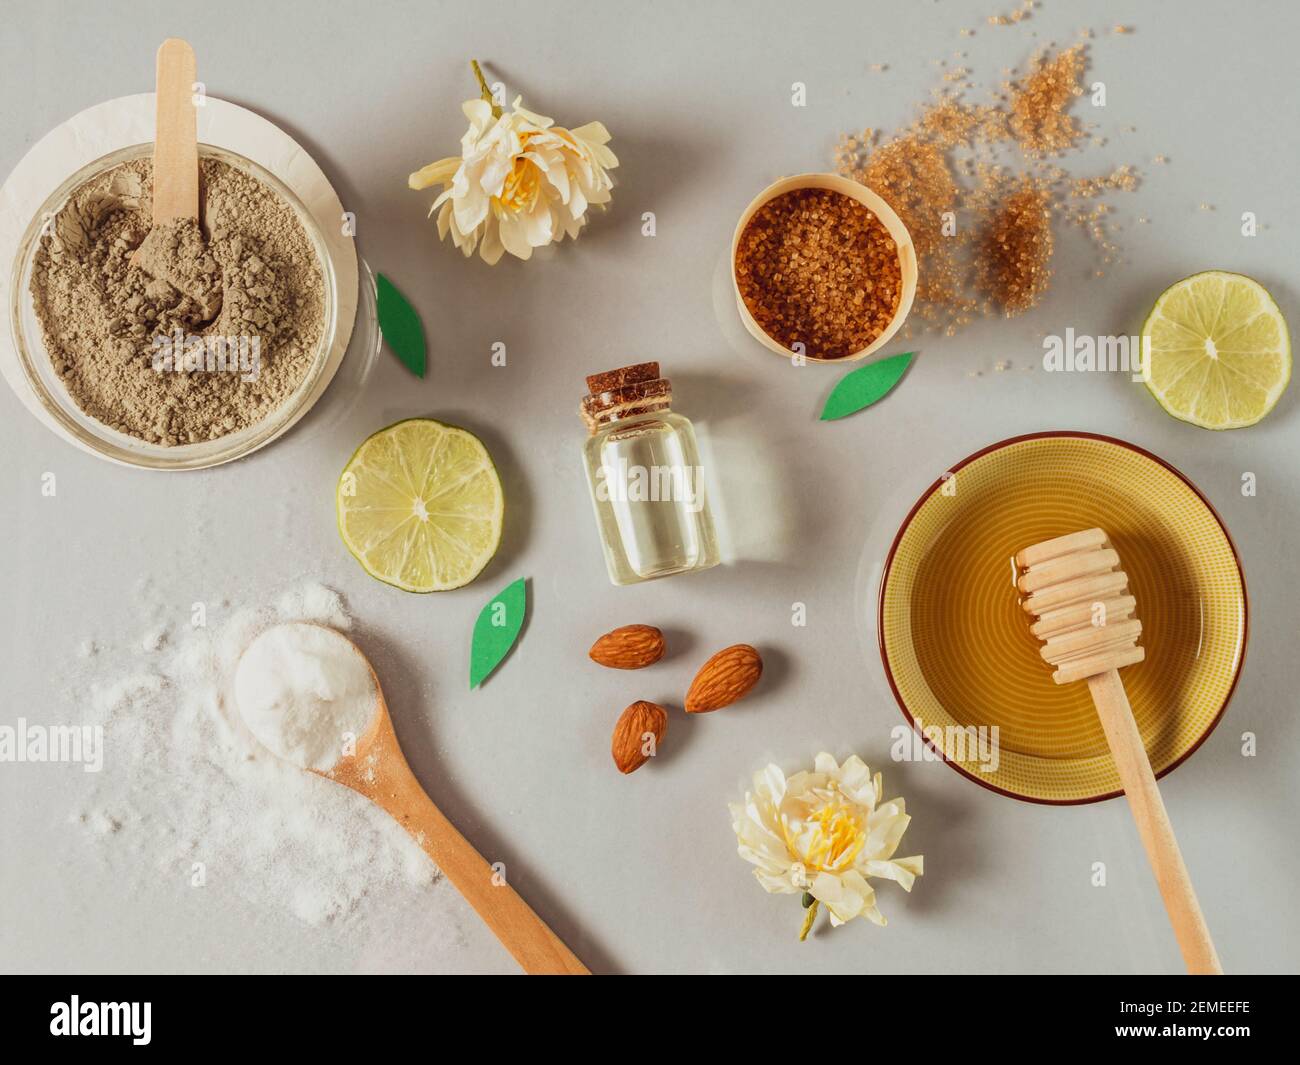 natural skin care products: backing soda, clay powder, brown sugar, almond oil. Colorful background of natural cosmetics and flowers. natural ingredie Stock Photo